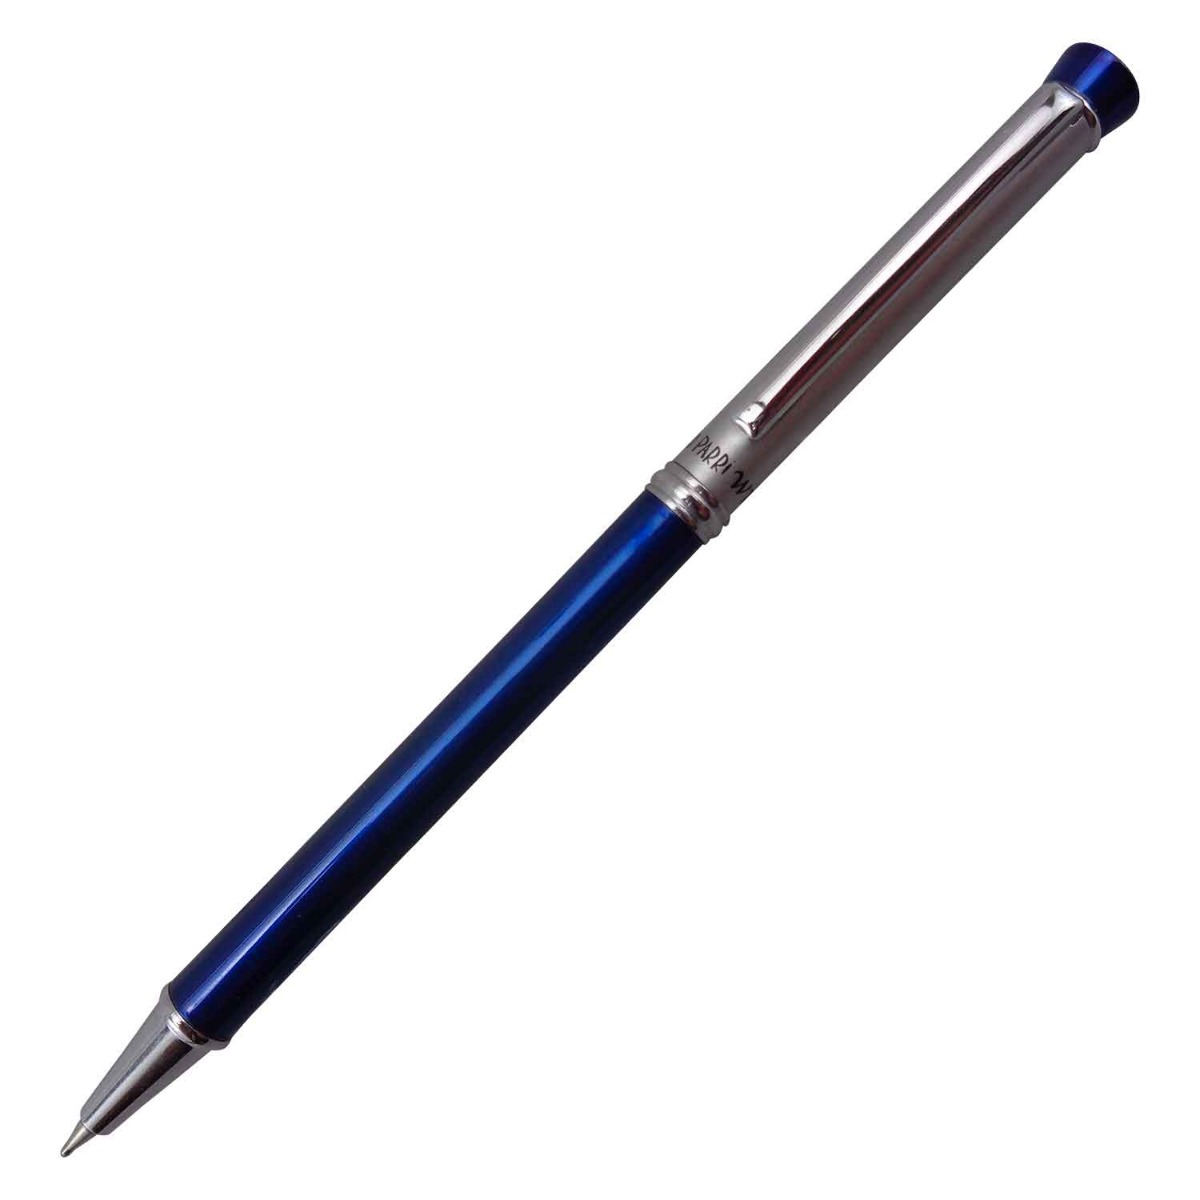 Picasso Parri Wish Model:16032 Slim Glossy Royal Blue Color Body With Silver Cap Design And Stone On Top Fine Tip Twist Type Ball Pen